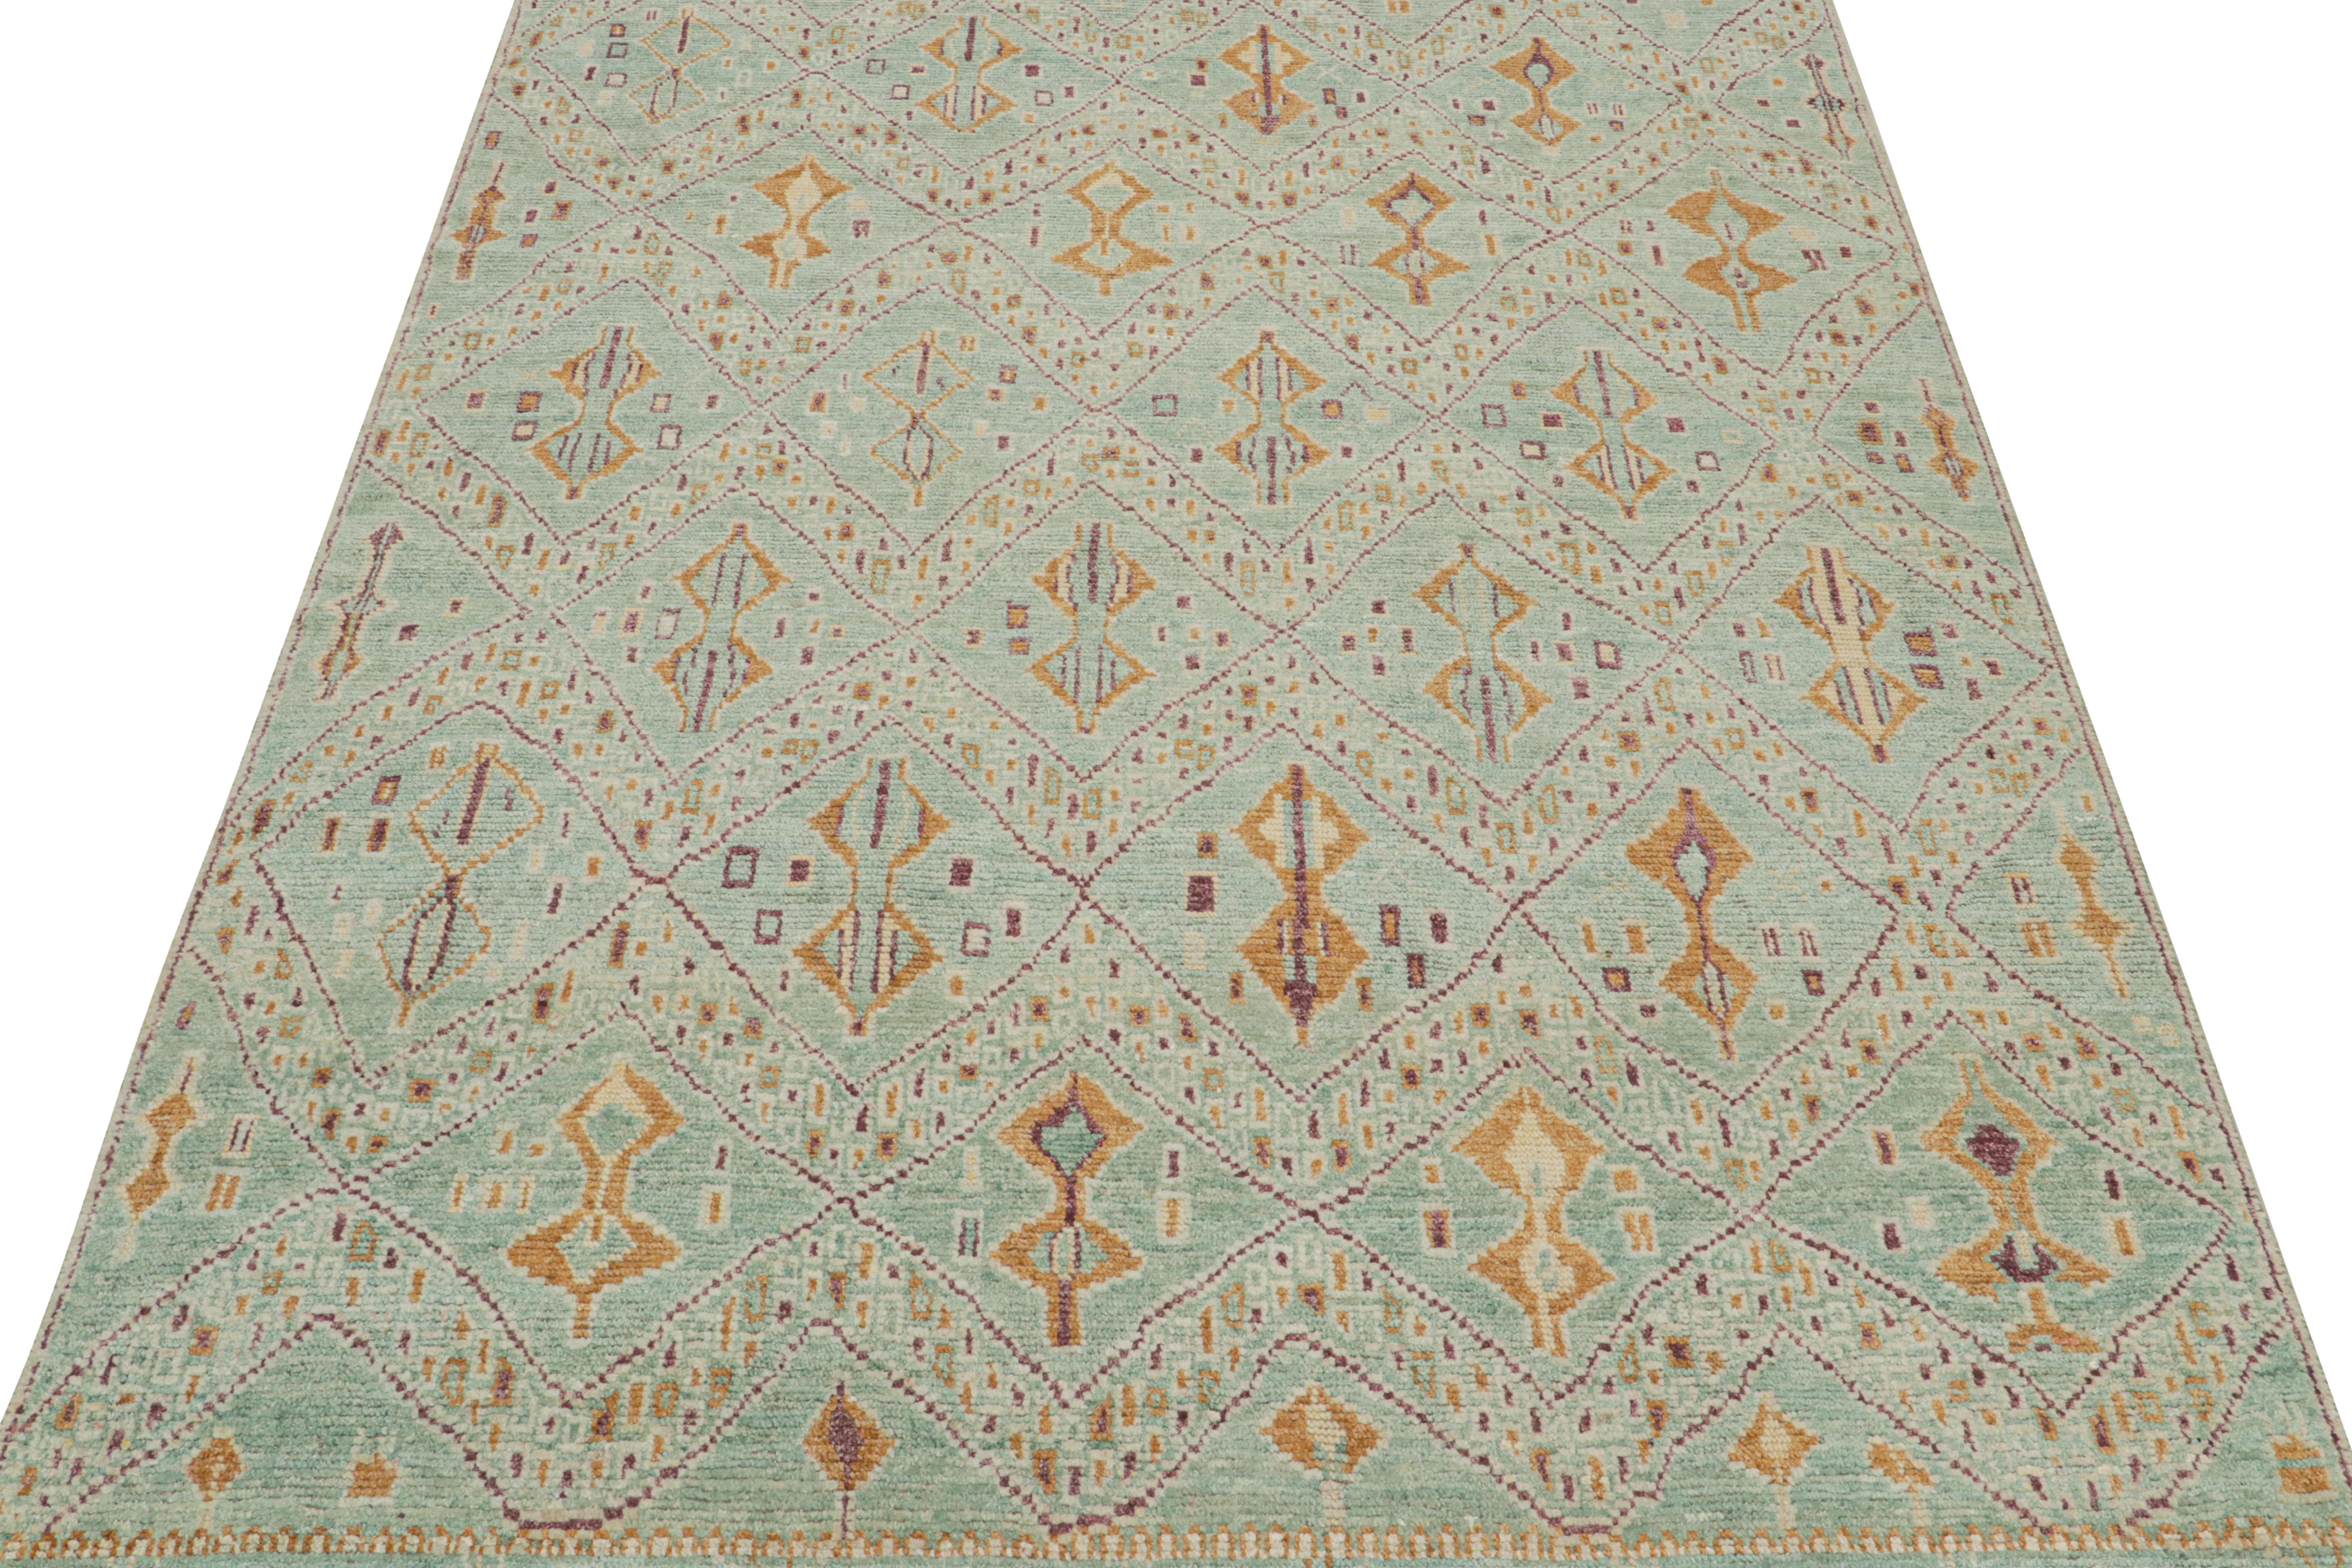 This 9x12 rug is a new addition to Rug & Kilim’s Moroccan rug collection. Hand-knotted in wool and silk, its design recaptures the classic tribal sensibility in a new modern quality.
This whimsical design enjoys aqua blue with seafoam accents in